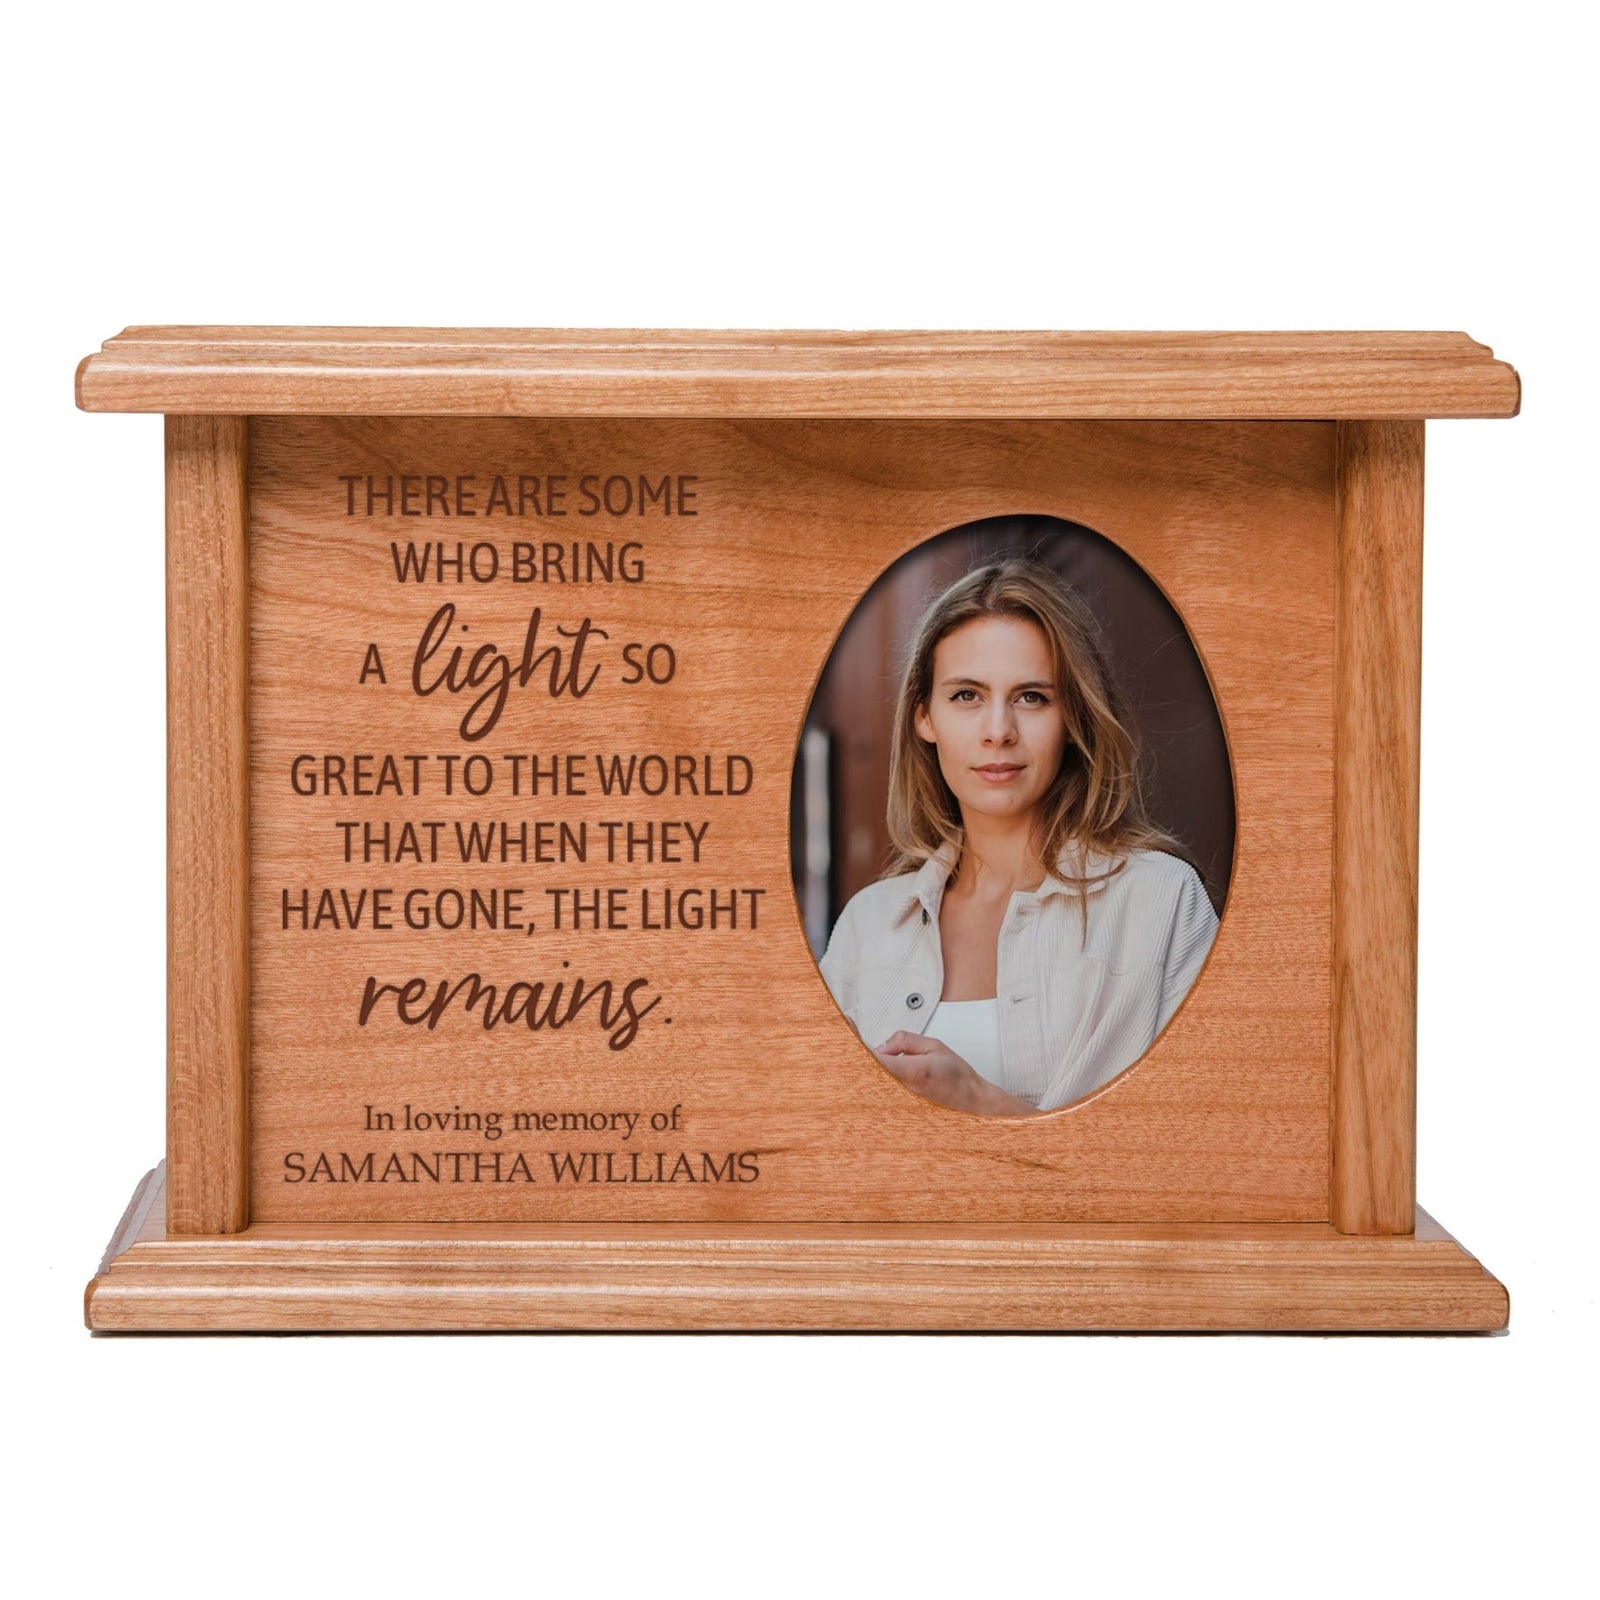 Personalized Wooden Memorial Decorative Photo Urn For Human Ashes - There Are Some Who Bring The Light - LifeSong Milestones